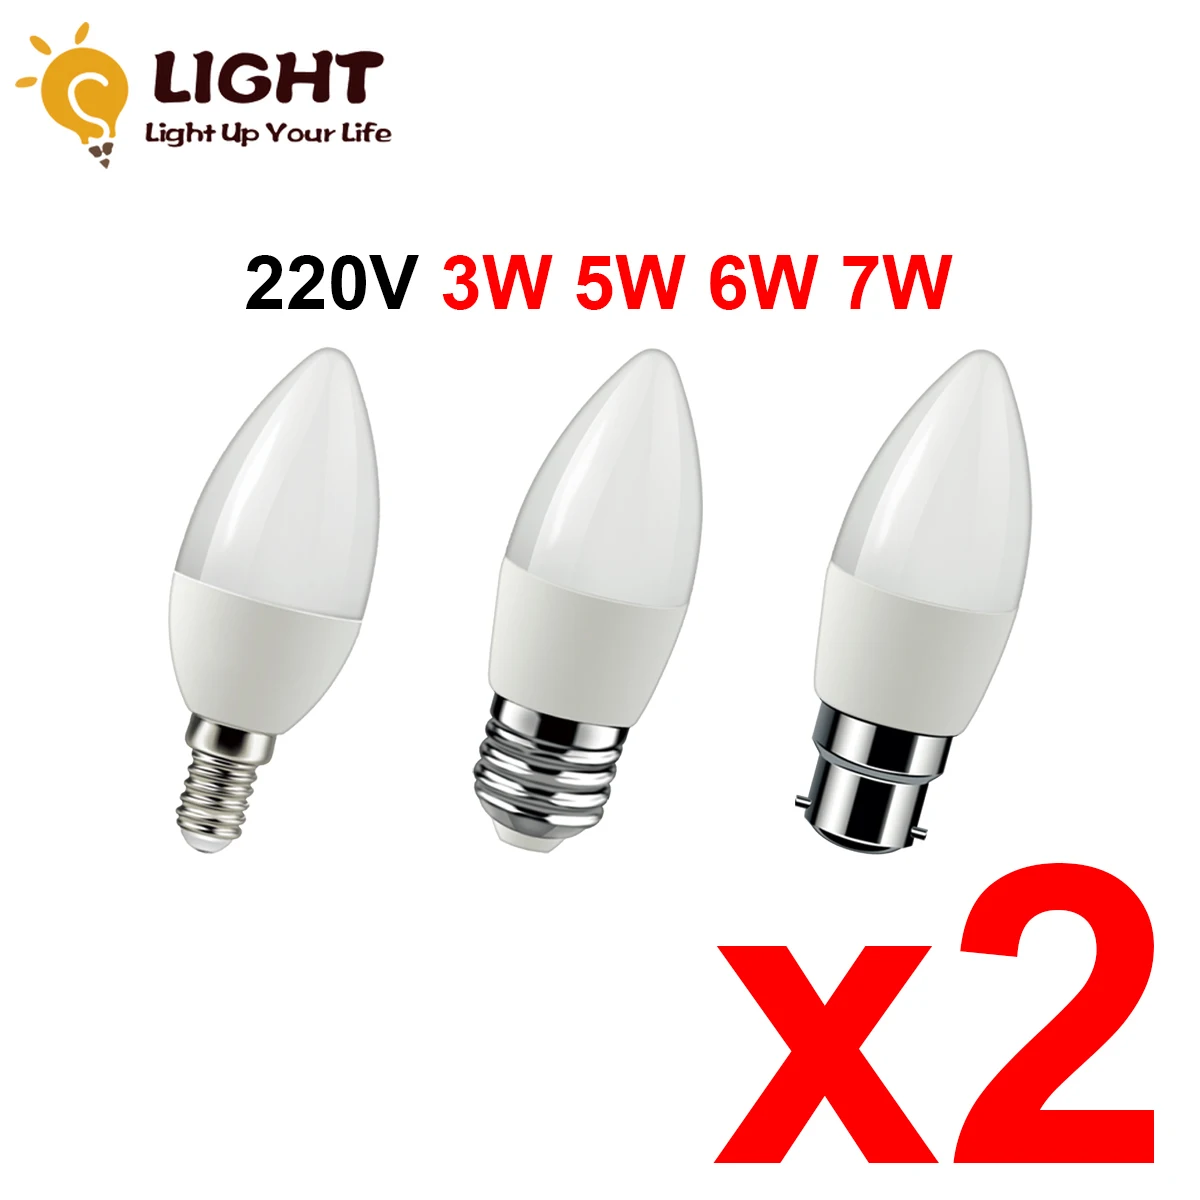 

2PCS Led Candle Bulb C37 3W 5W 6W 7W E27 B22 E14 AC220v-240v 3000K 4000K 6000k For Home Decoration Lamp